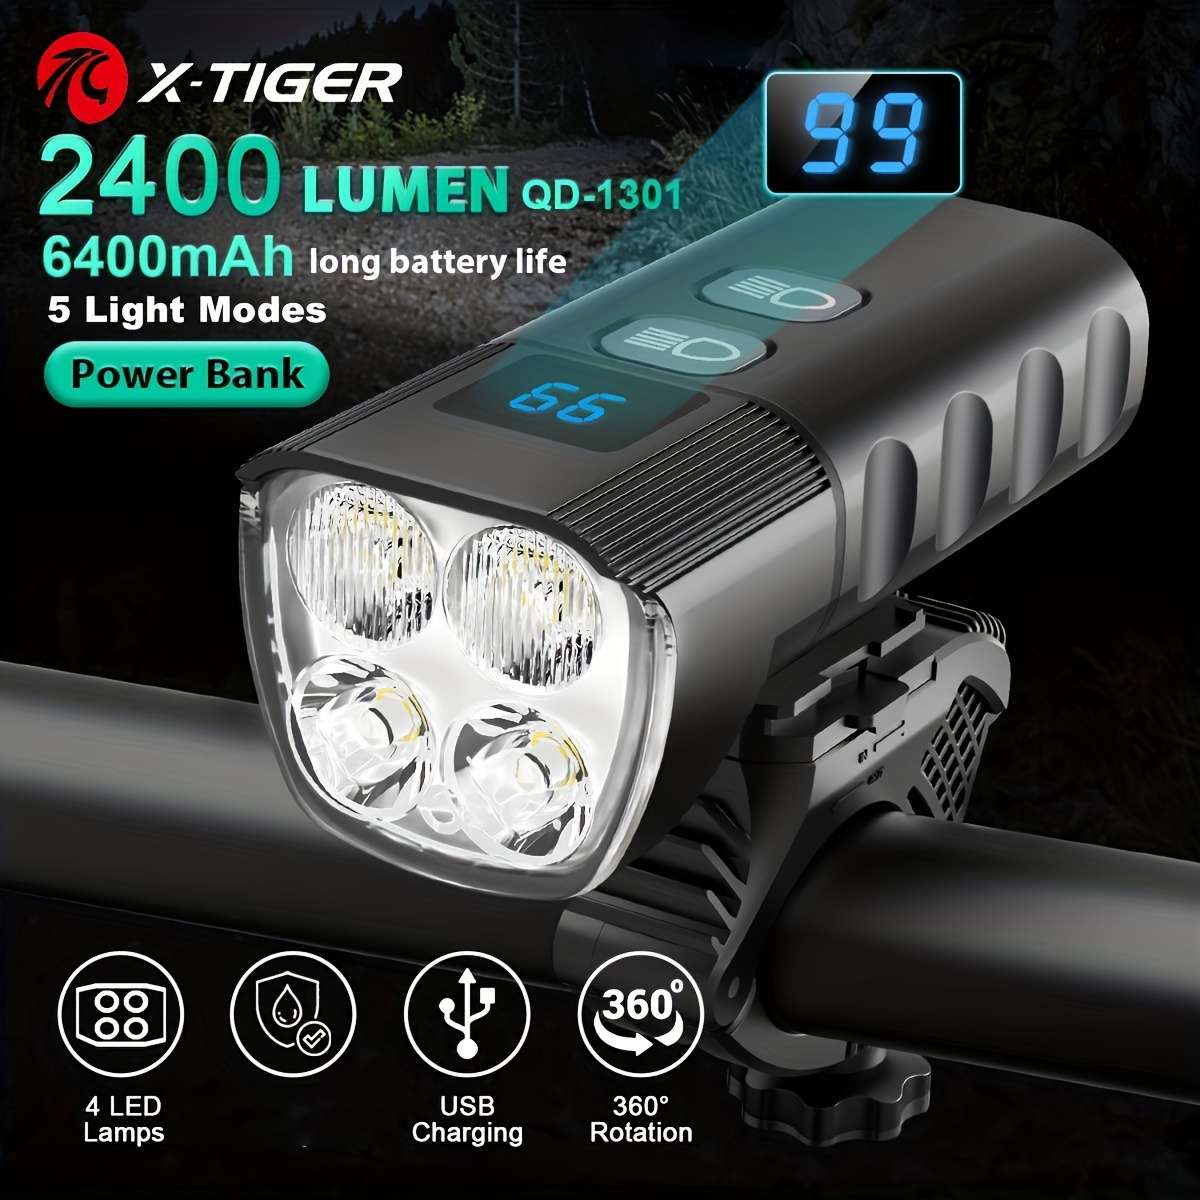 

X-tiger Usb Rechargeable Bike Headlight - Super Bright Waterproof Front Light With 4 Leds For Outdoor Cycling